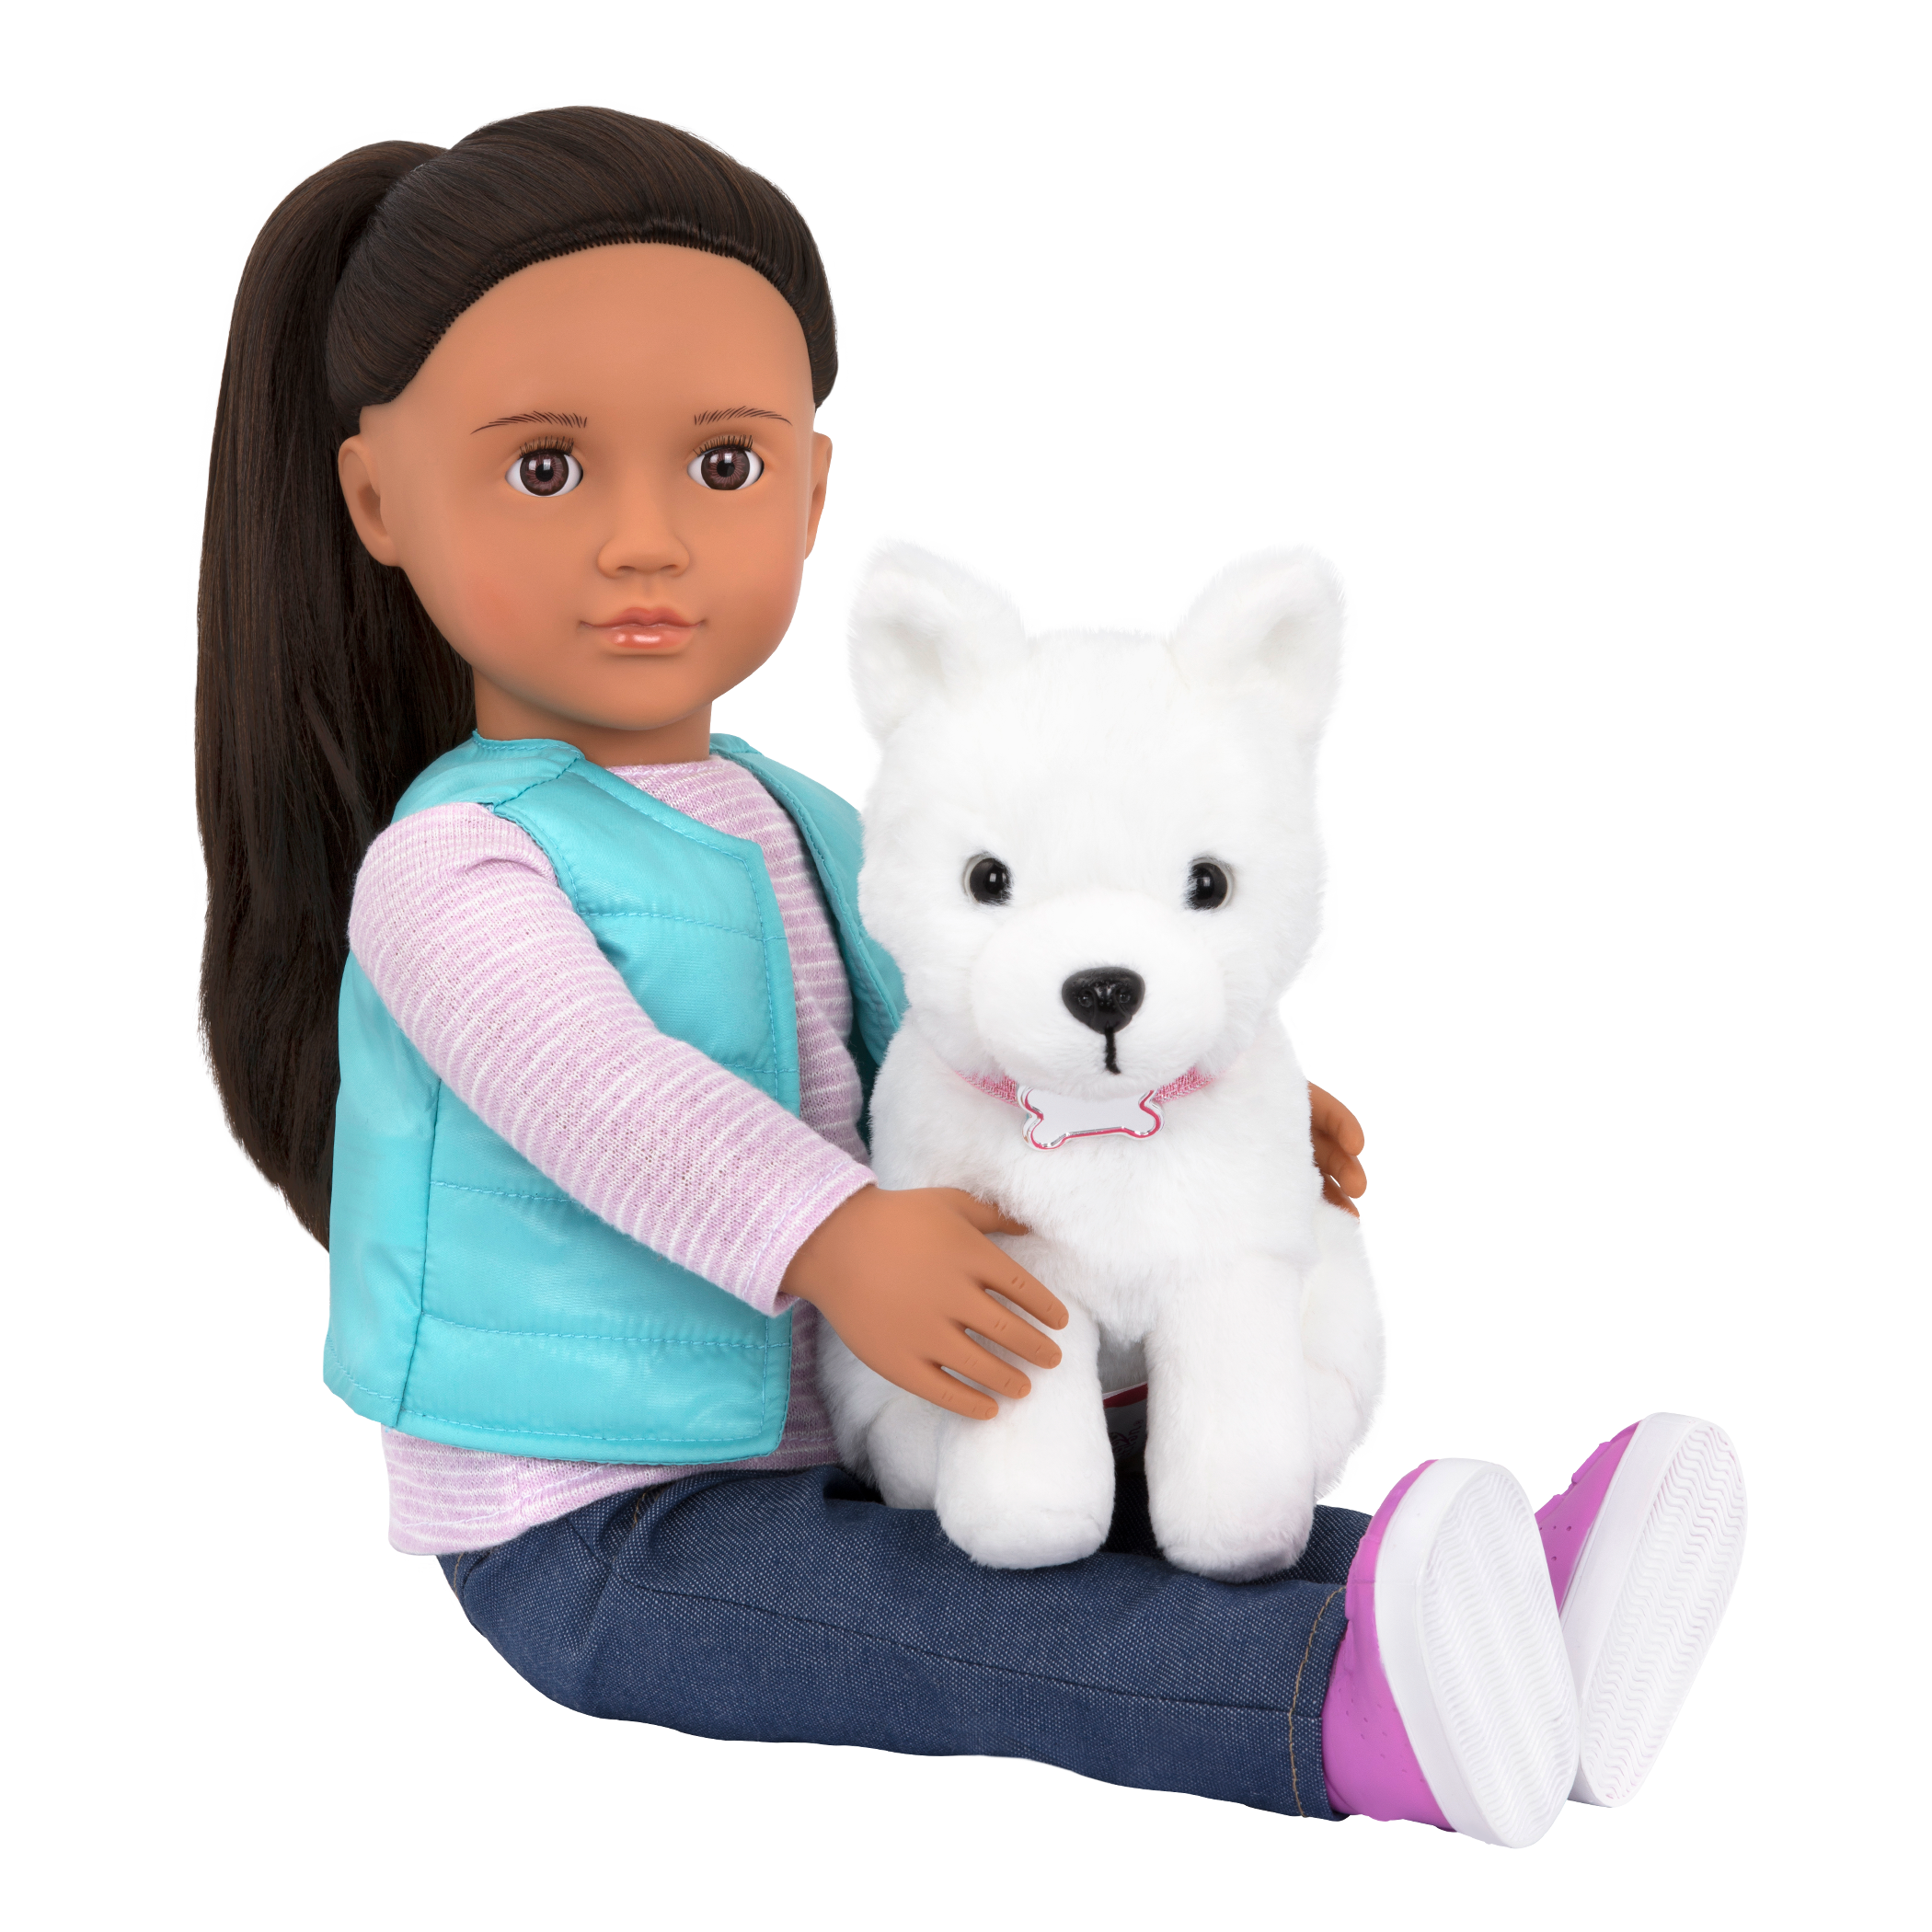 Cassie and Samoyed dog - 18-inch Bambola and pet